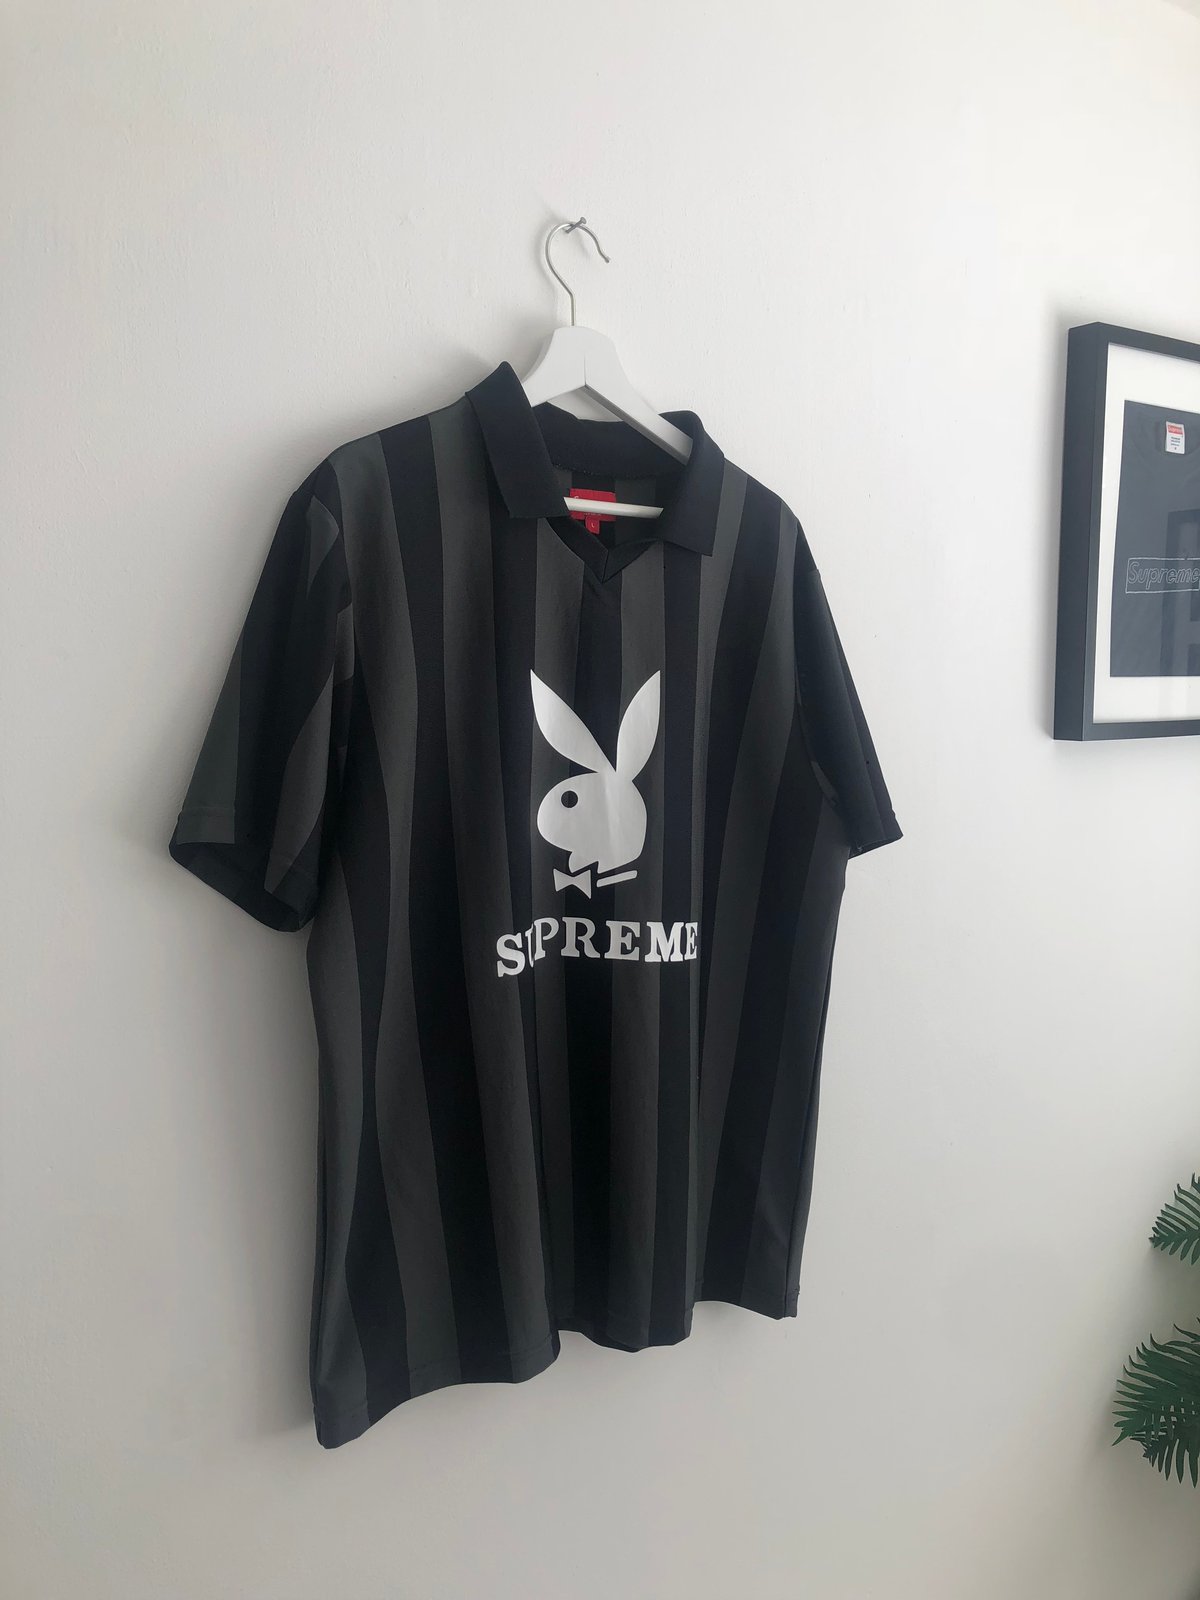 Supreme x Playboy jersey size L | Aarons Archive